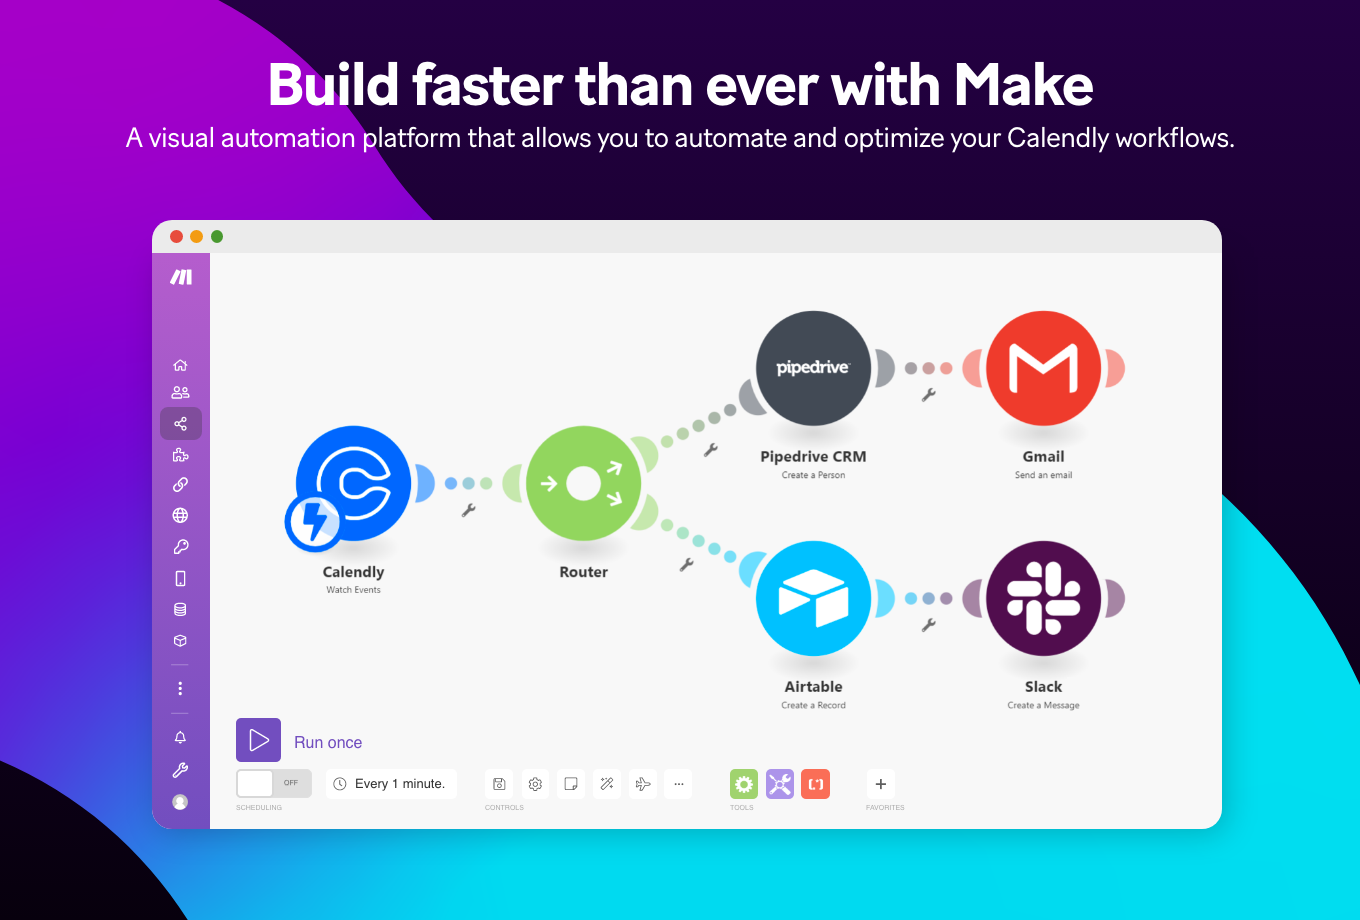 Make is a visual automation platform that allows you to automate and optimize your workflows.